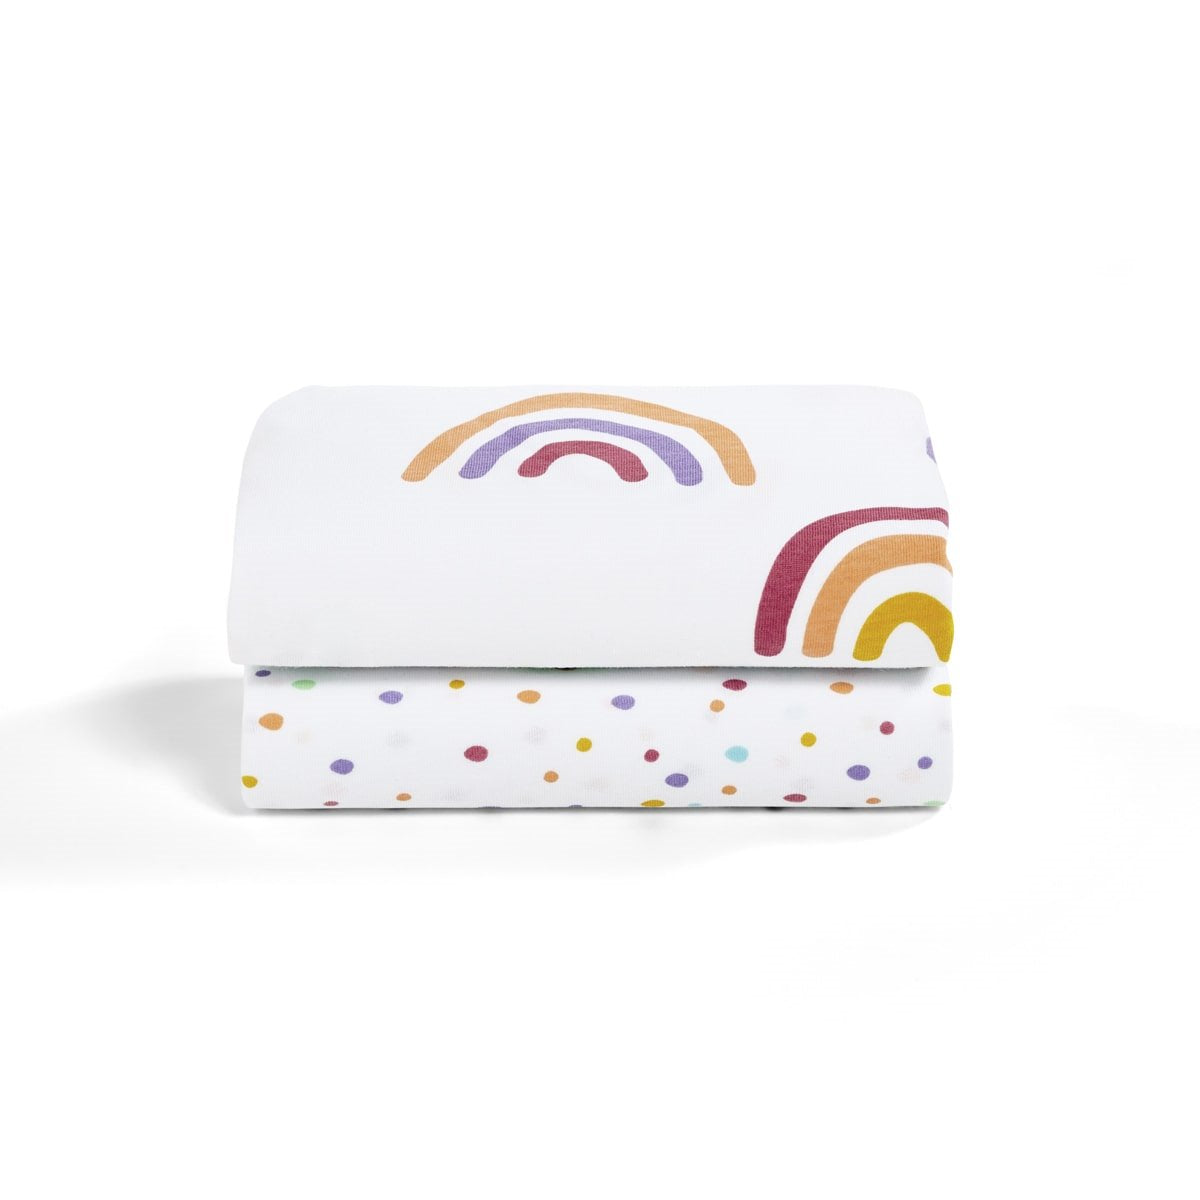 Snuzpod Crib 2 Pack Fitted Sheets - Colour Rainbow